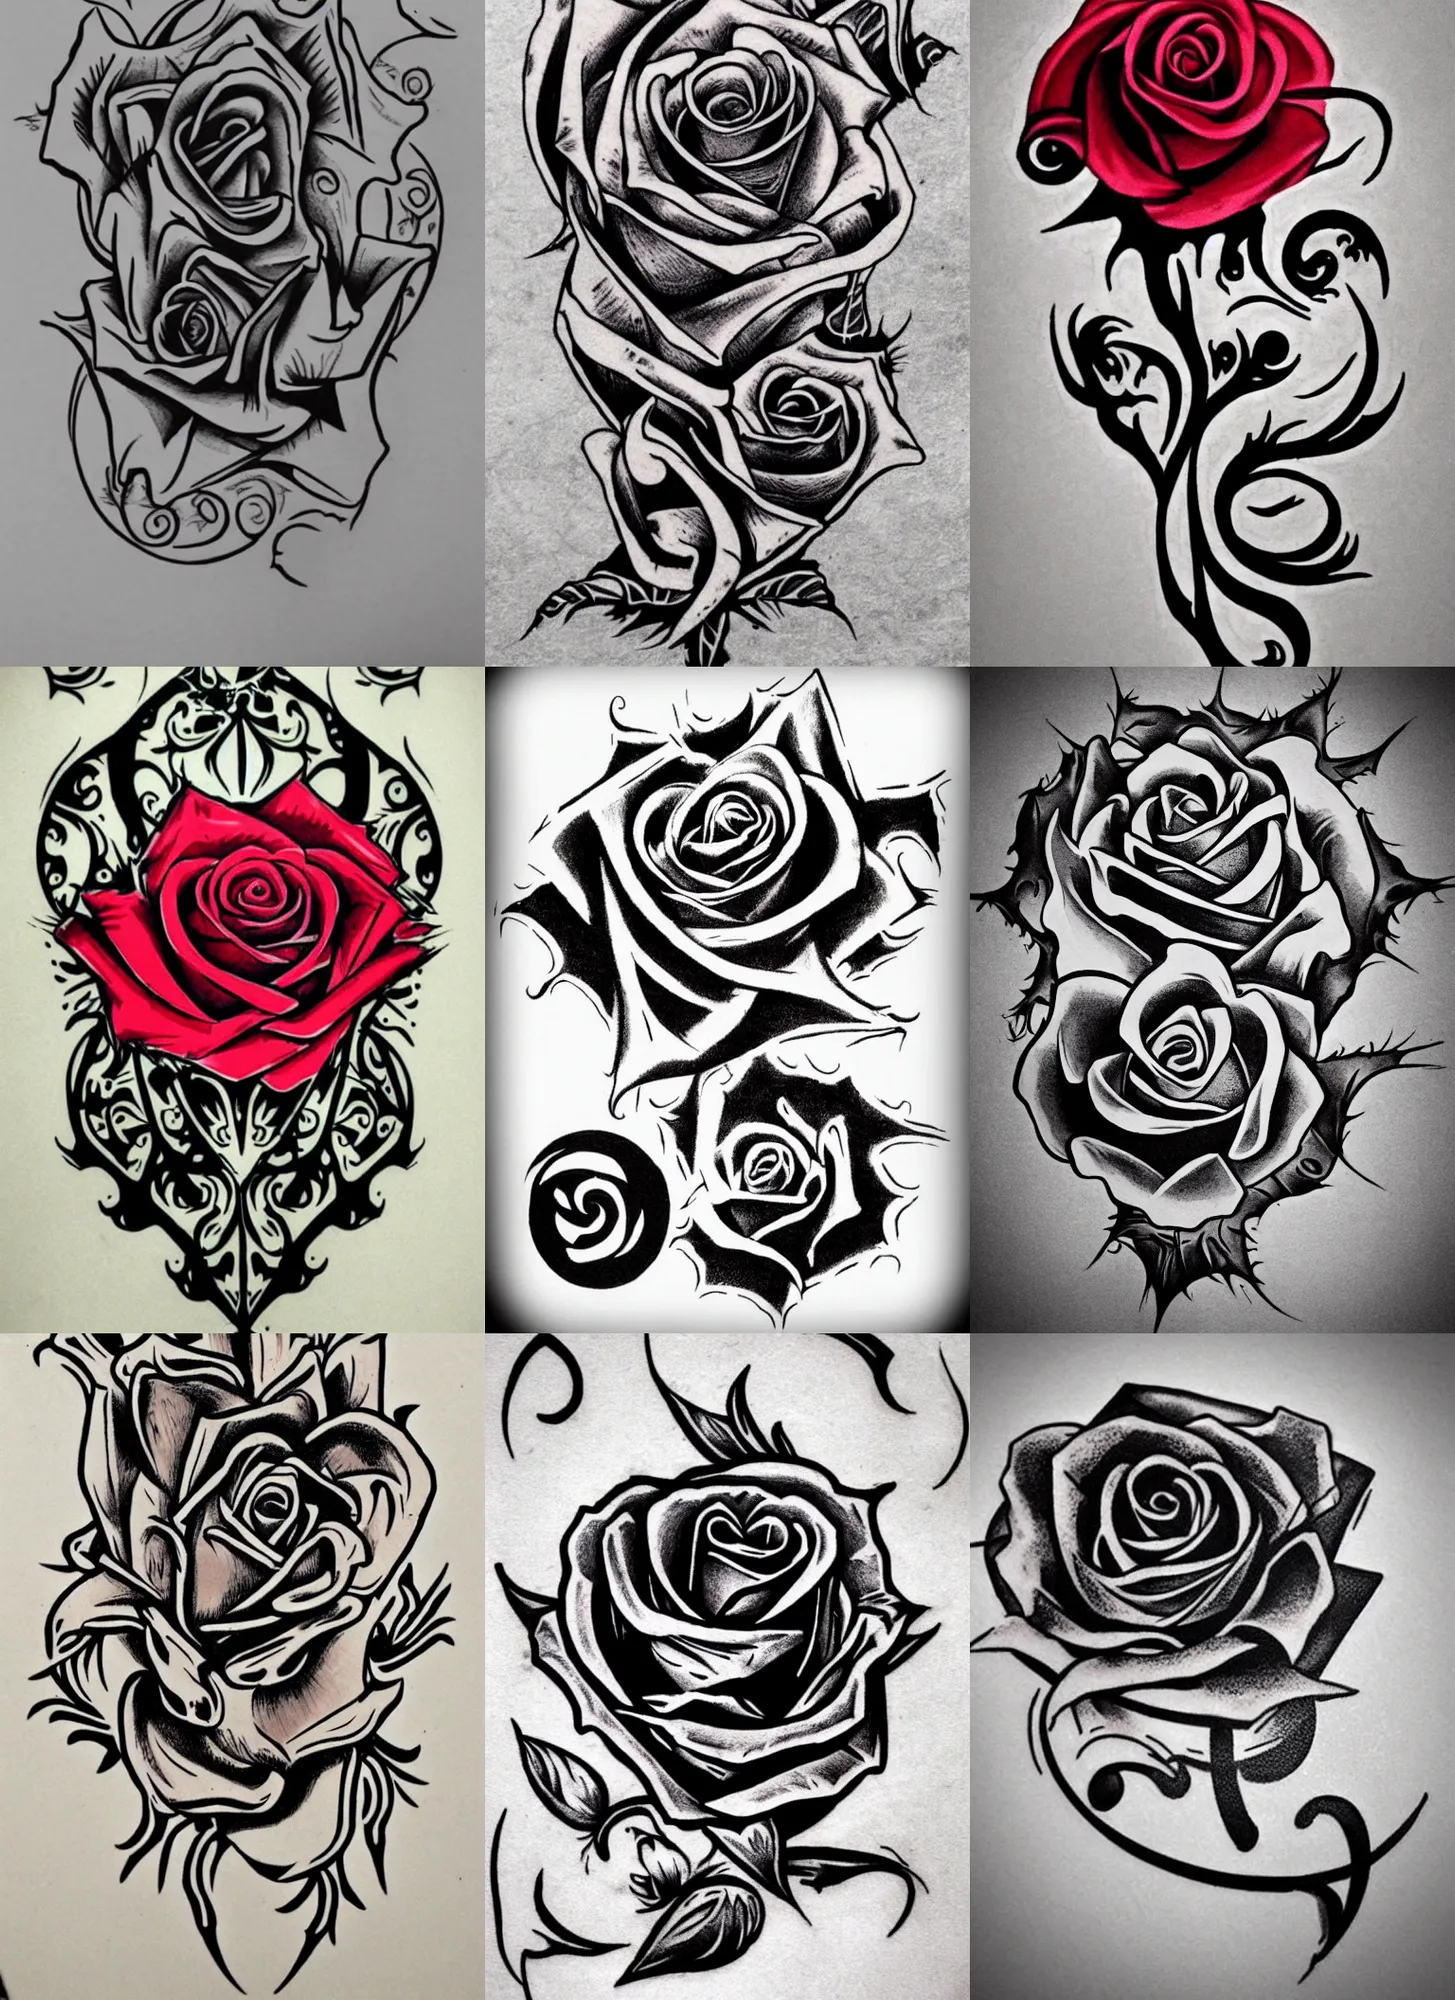 Flowing Fabric with Roses Tattoo Design – Tattoos Wizard Designs